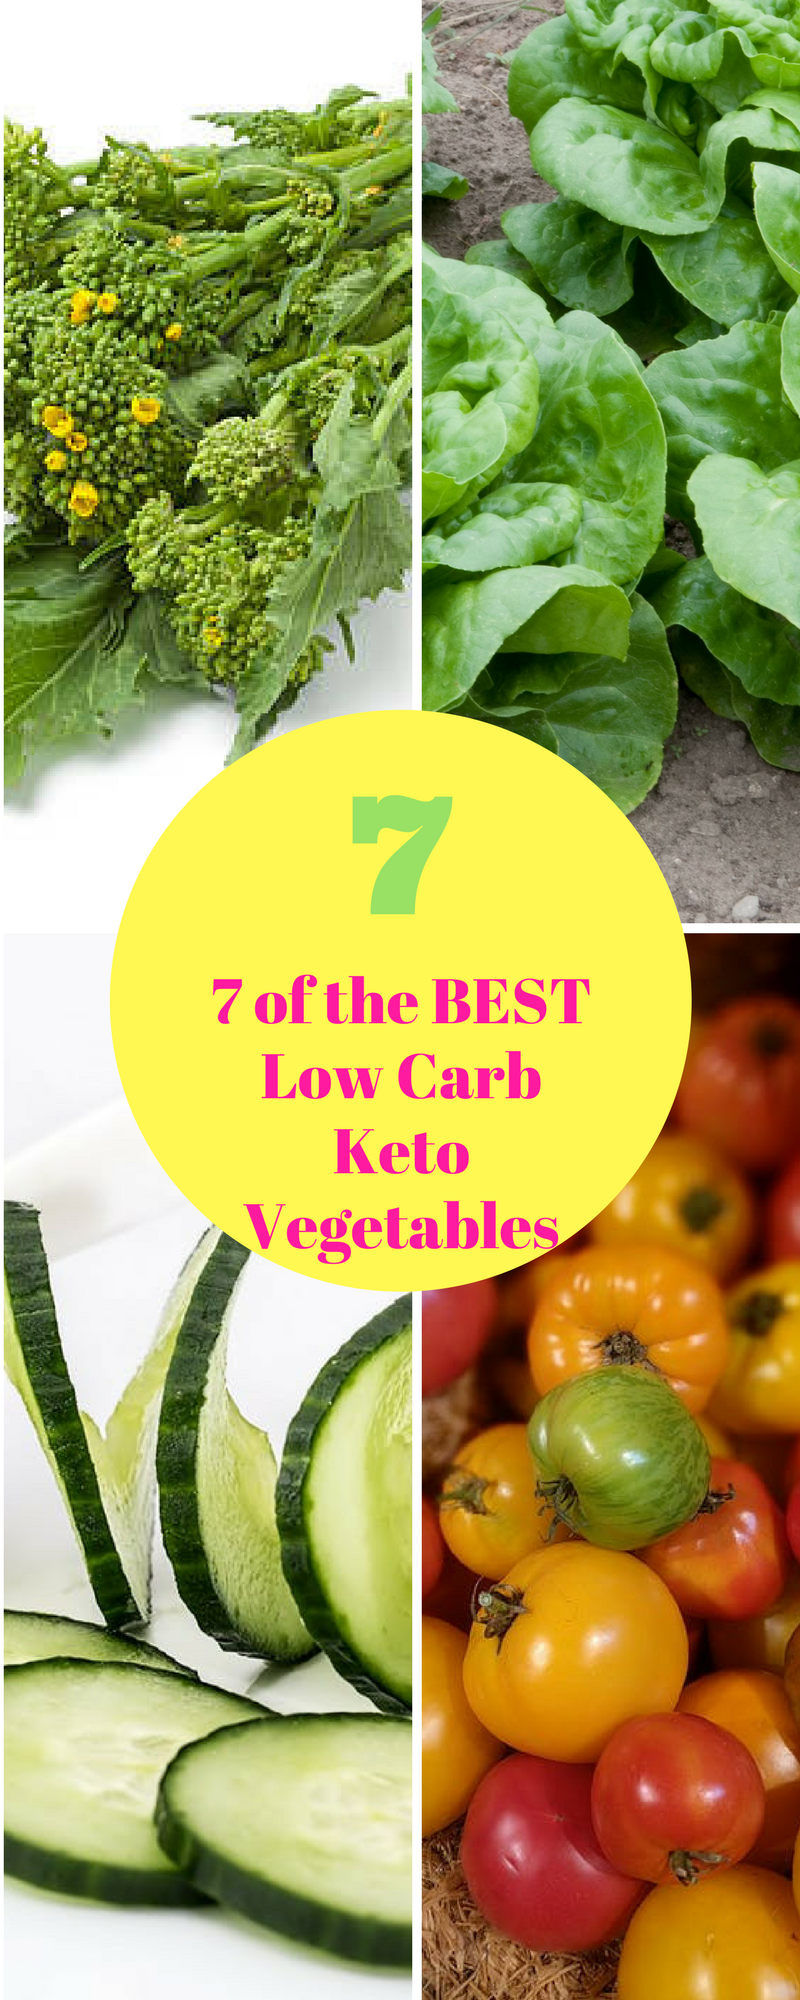 Use this list of 7 low carb Keto vegetables for your weight loss goals. Get into ketosis while eating low carb. The ketogenic diet eats good fats, protein and low carb.